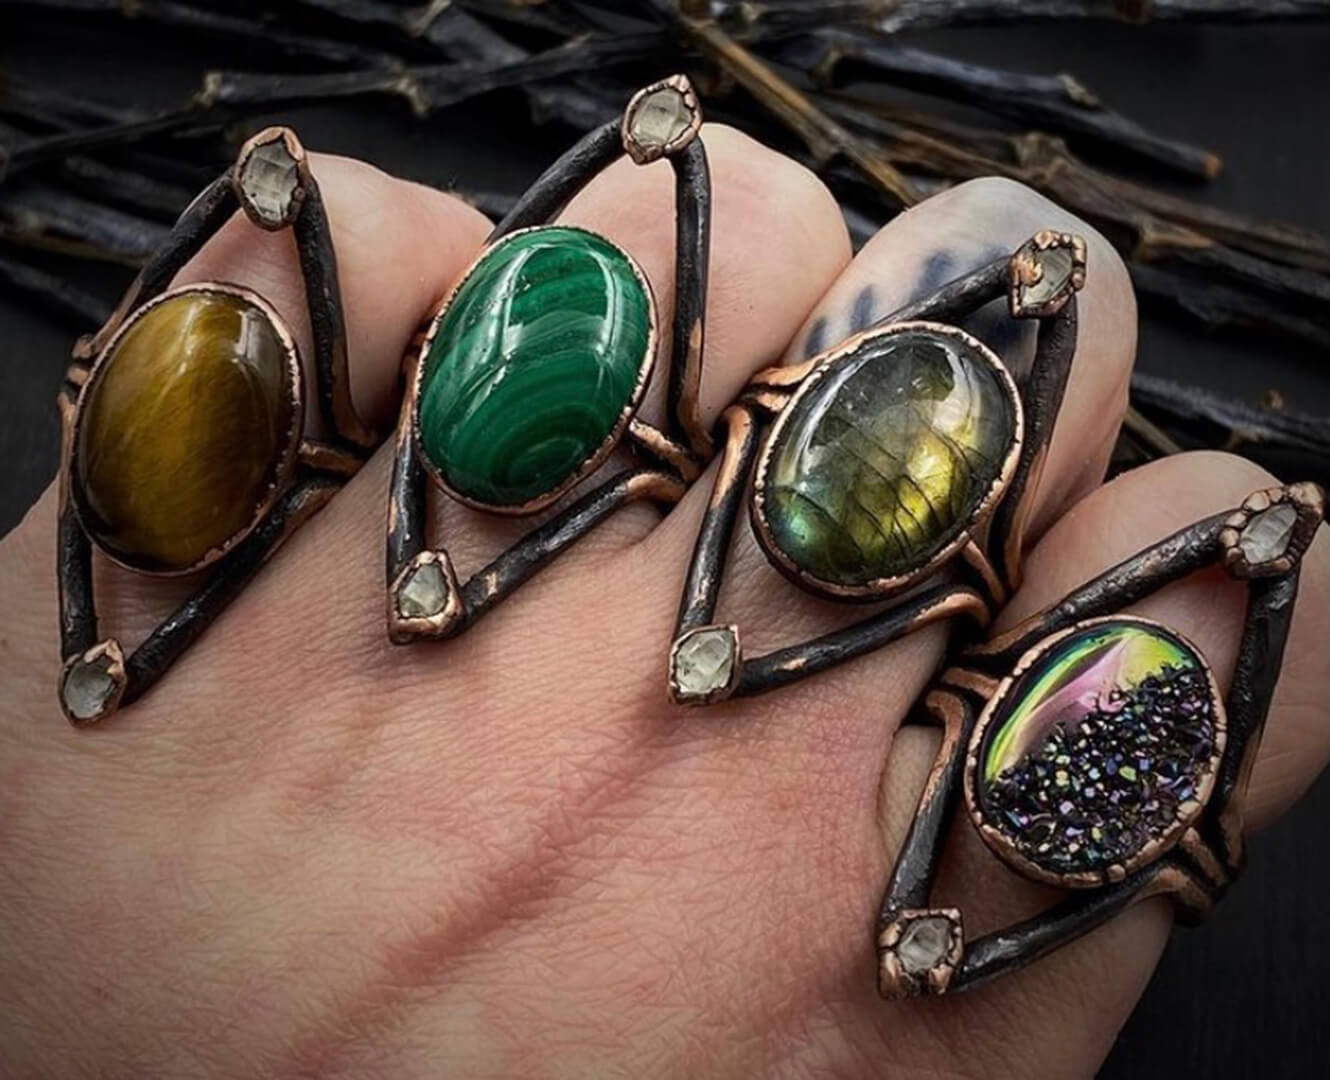 Local Creates Unique Copper Jewellery With Recycled Materials Hexelheim